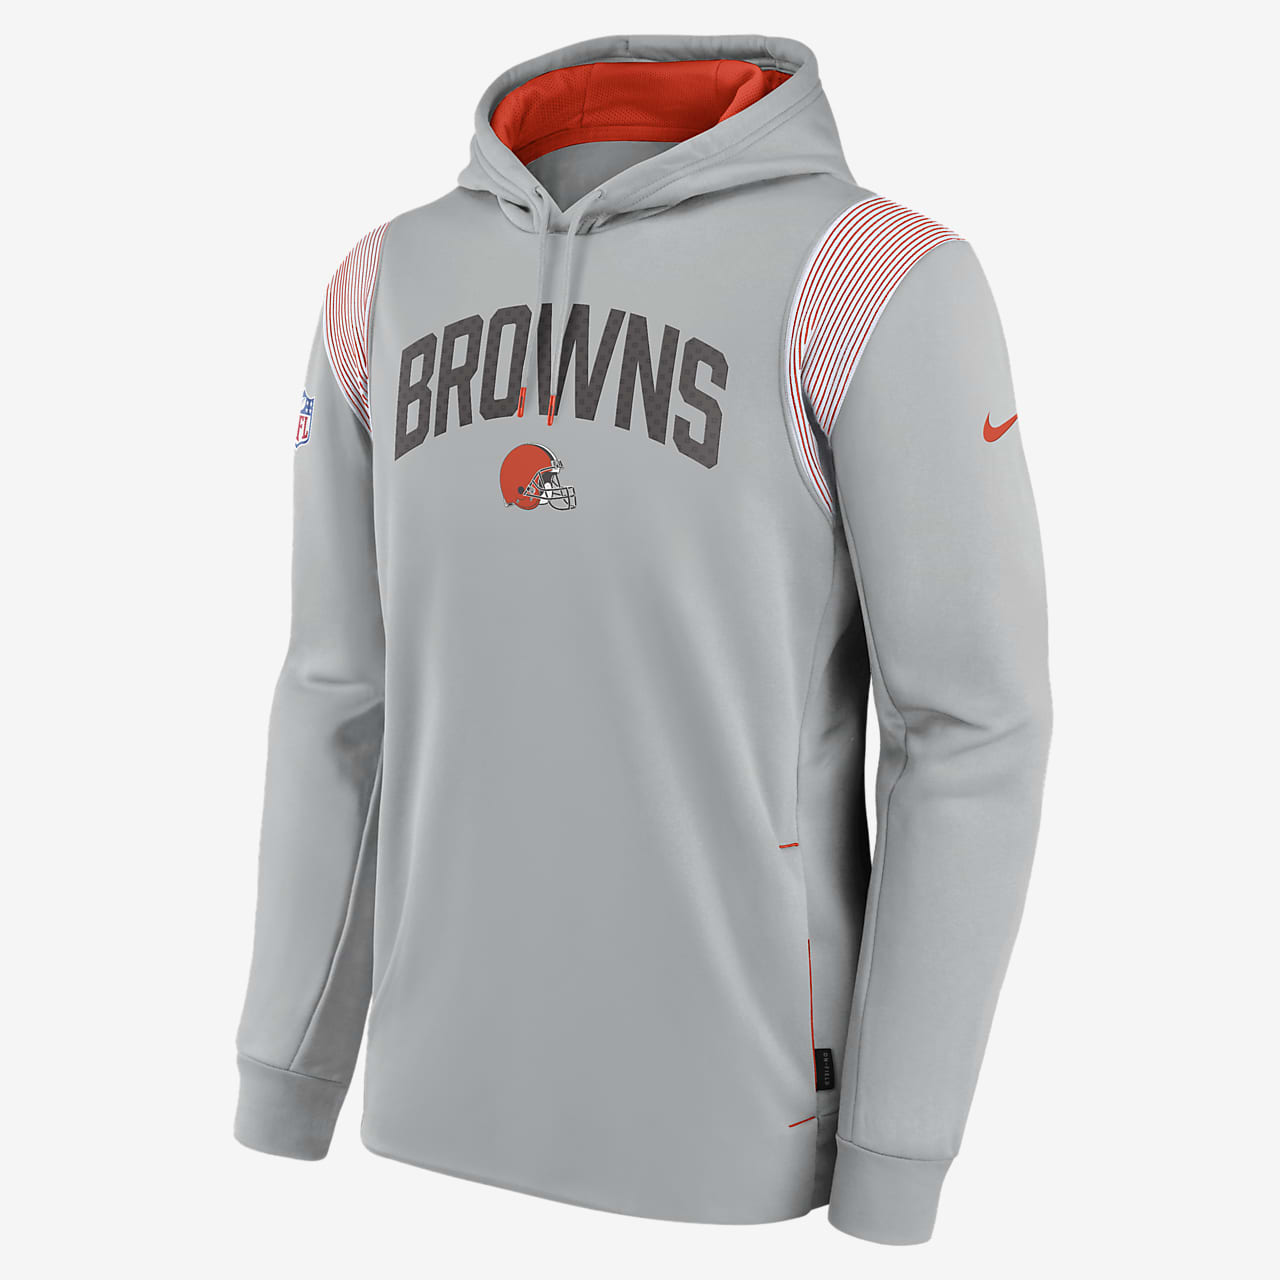 Men's Nike Gray Cleveland Browns Sideline Athletic Stack Performance Pullover Hoodie Size: Small